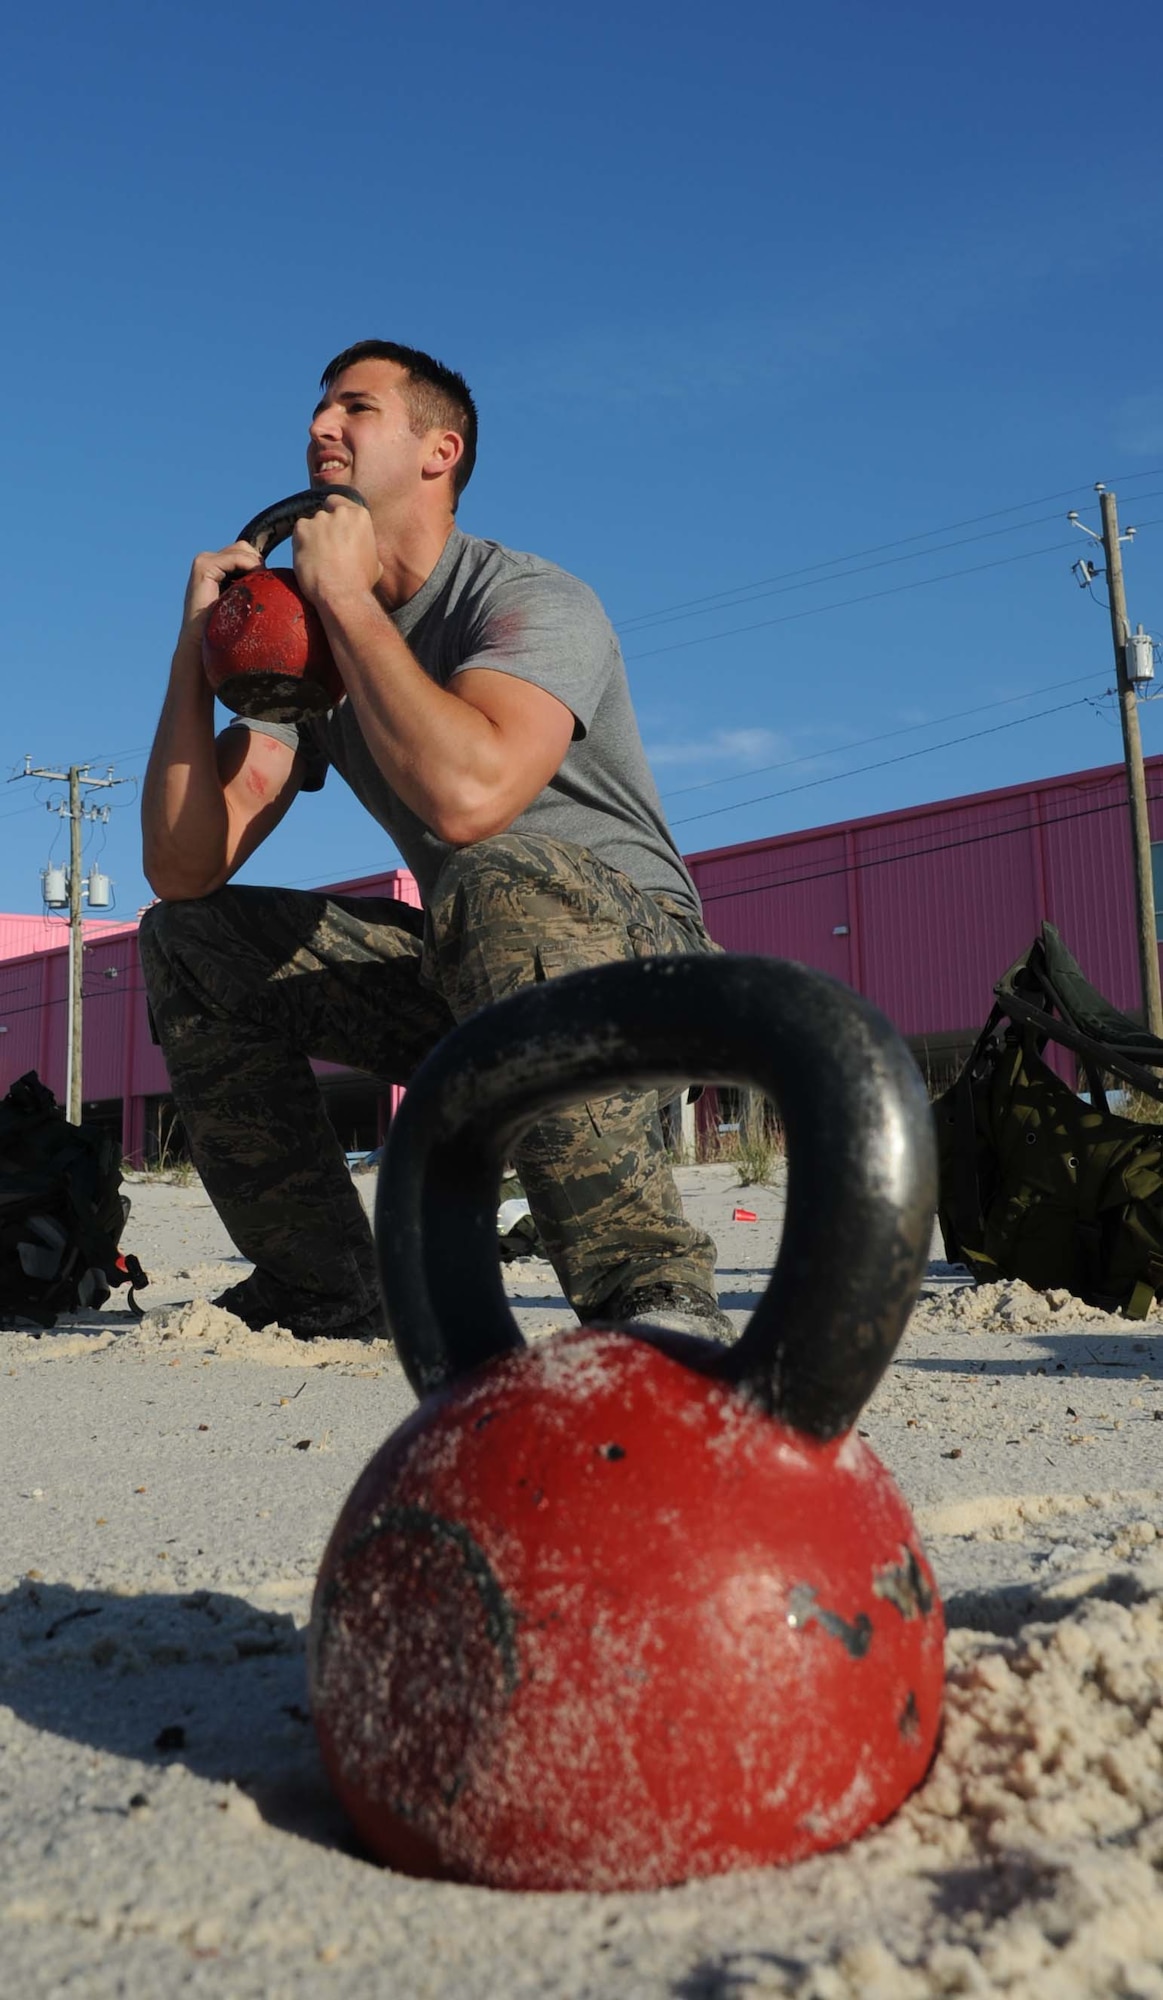 Airman 1st Class Craig Maffei, 334th Training Squadron, does a kettlebell goblet squat during the combat controllers’ physical training session April 12, 2013, on Biloxi beach.  Combat controllers are ground troops who are embedded with special forces teams and provide close-air support for special forces units. While at Keesler, trainees learn how to run, swim, carry a rucksack and conduct air traffic control. These Airmen are prepared physically and mentally for the demands of the combat controller pipeline while earning air traffic control certification in just 15 weeks.  (U.S. Air Force photo by Kemberly Groue)